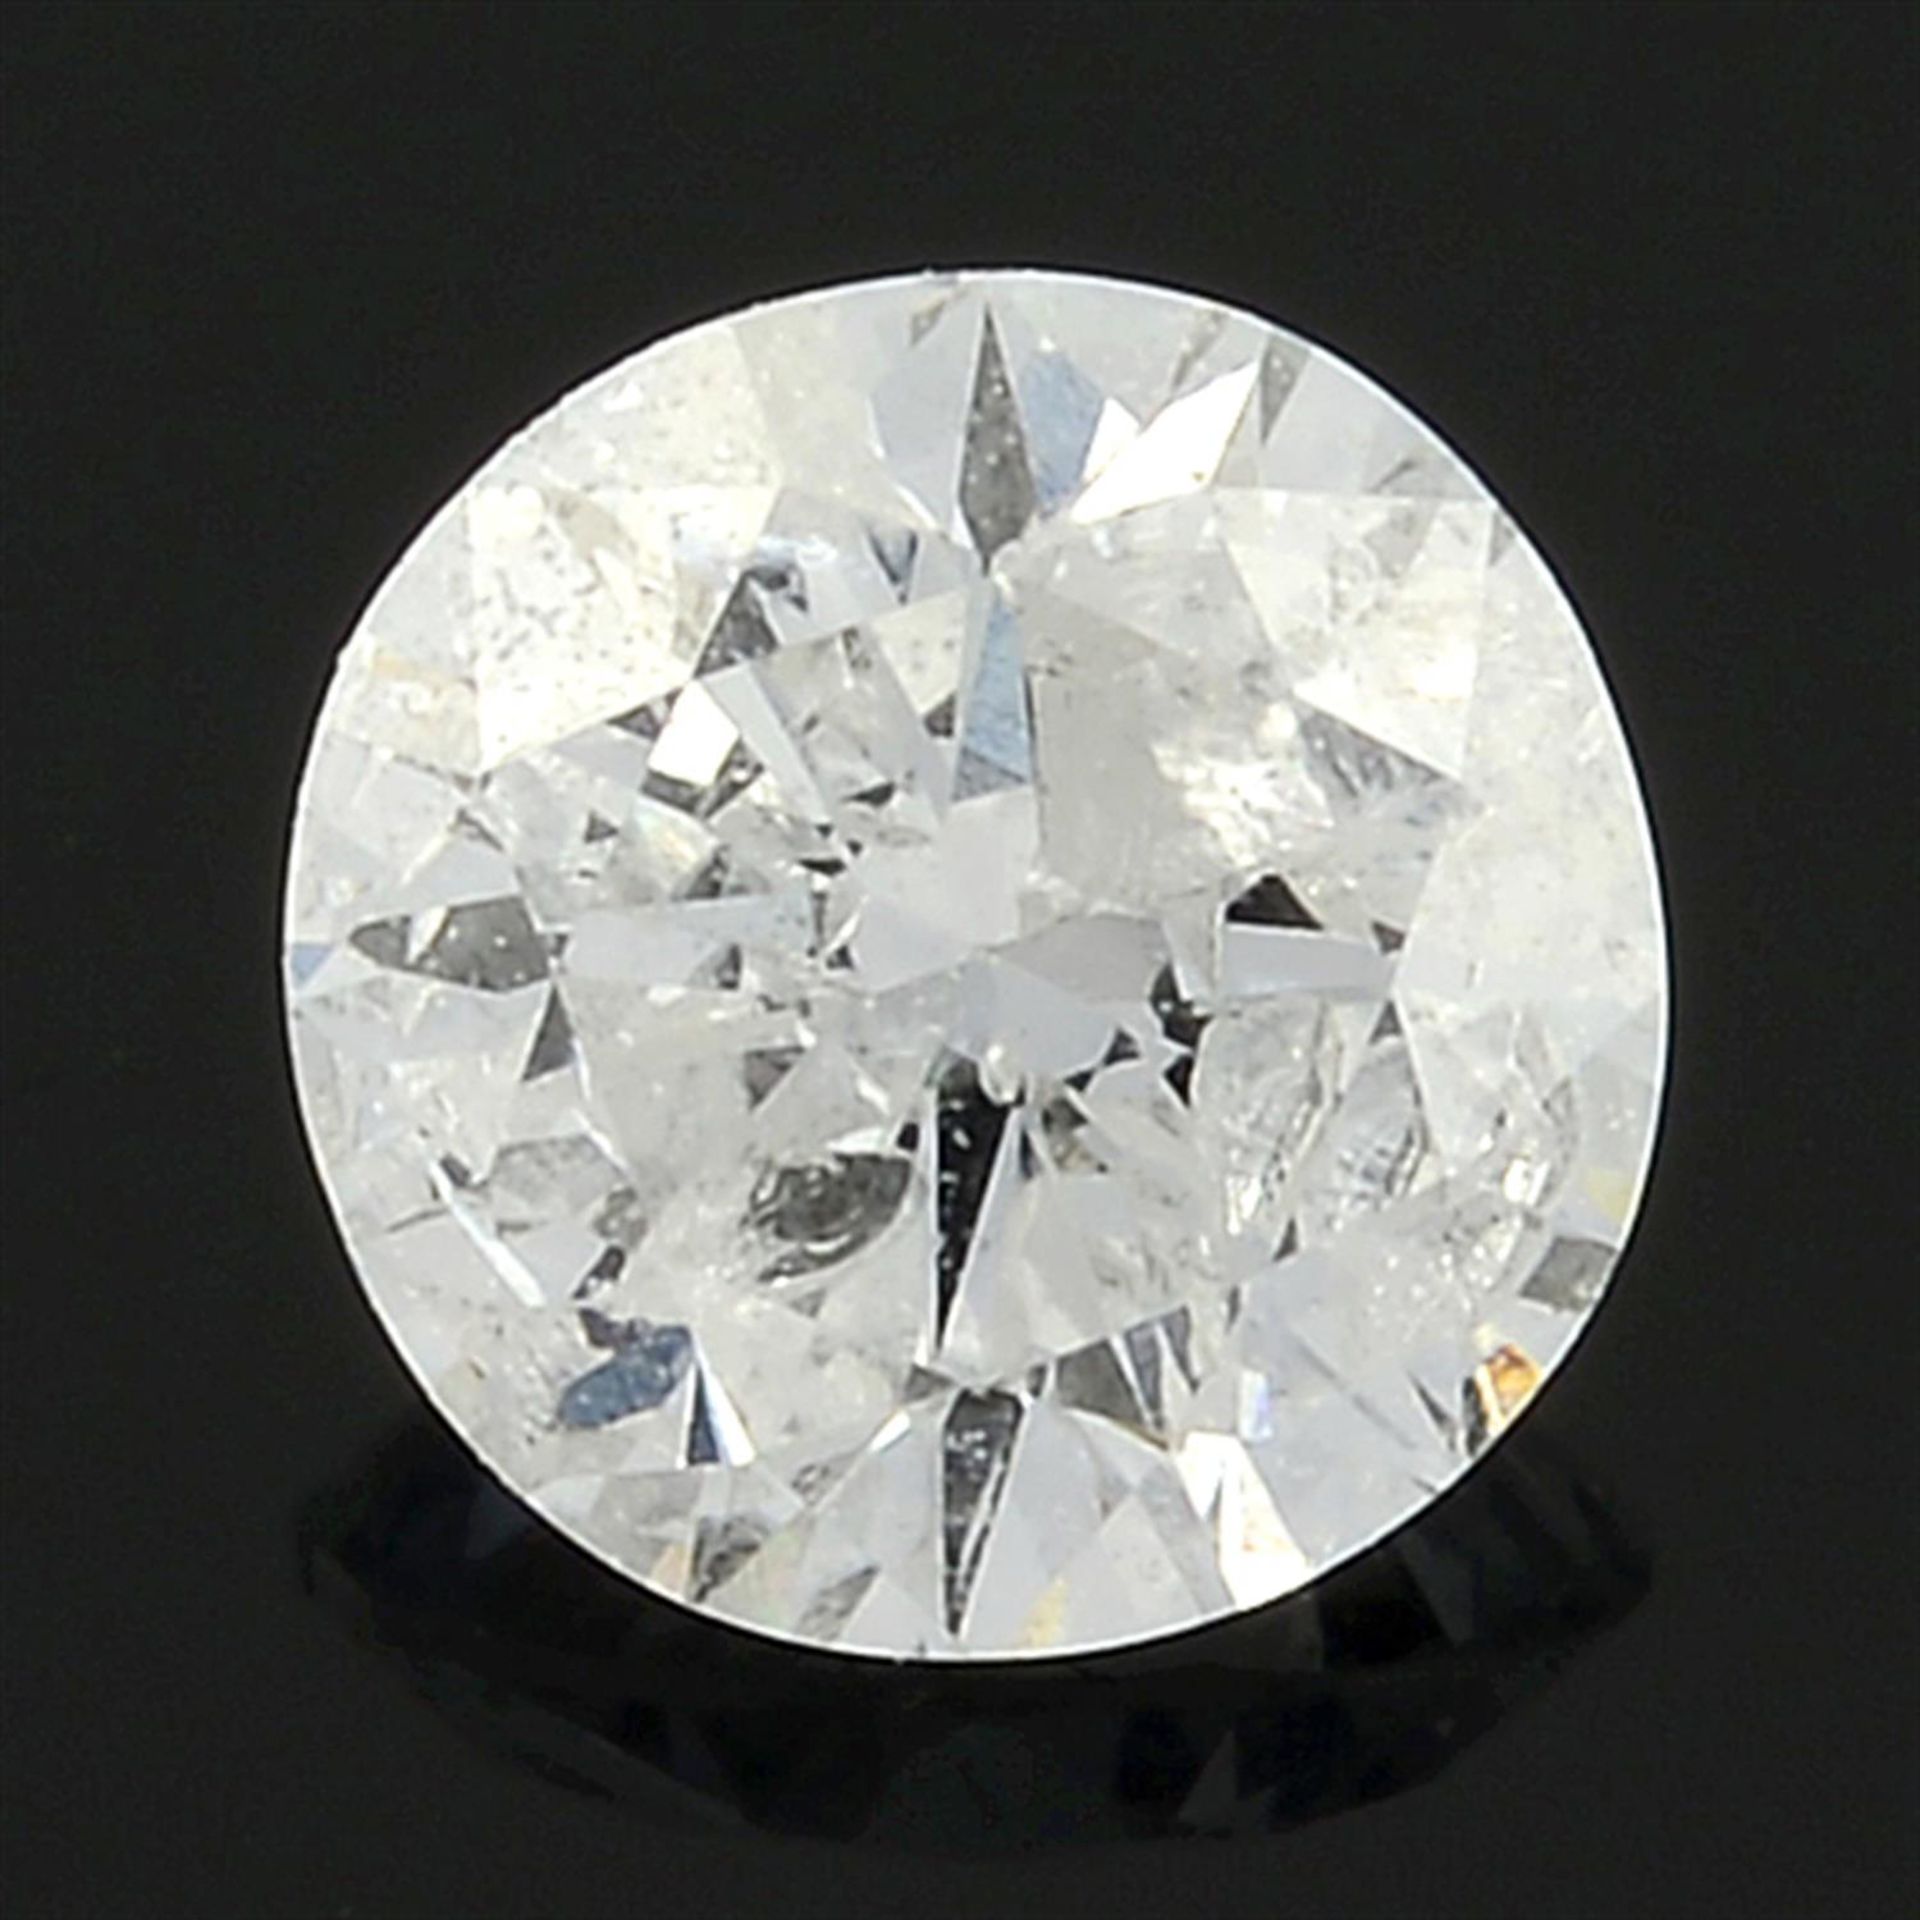 A brilliant cut diamond weighing 0.25ct with AnchorCert report.